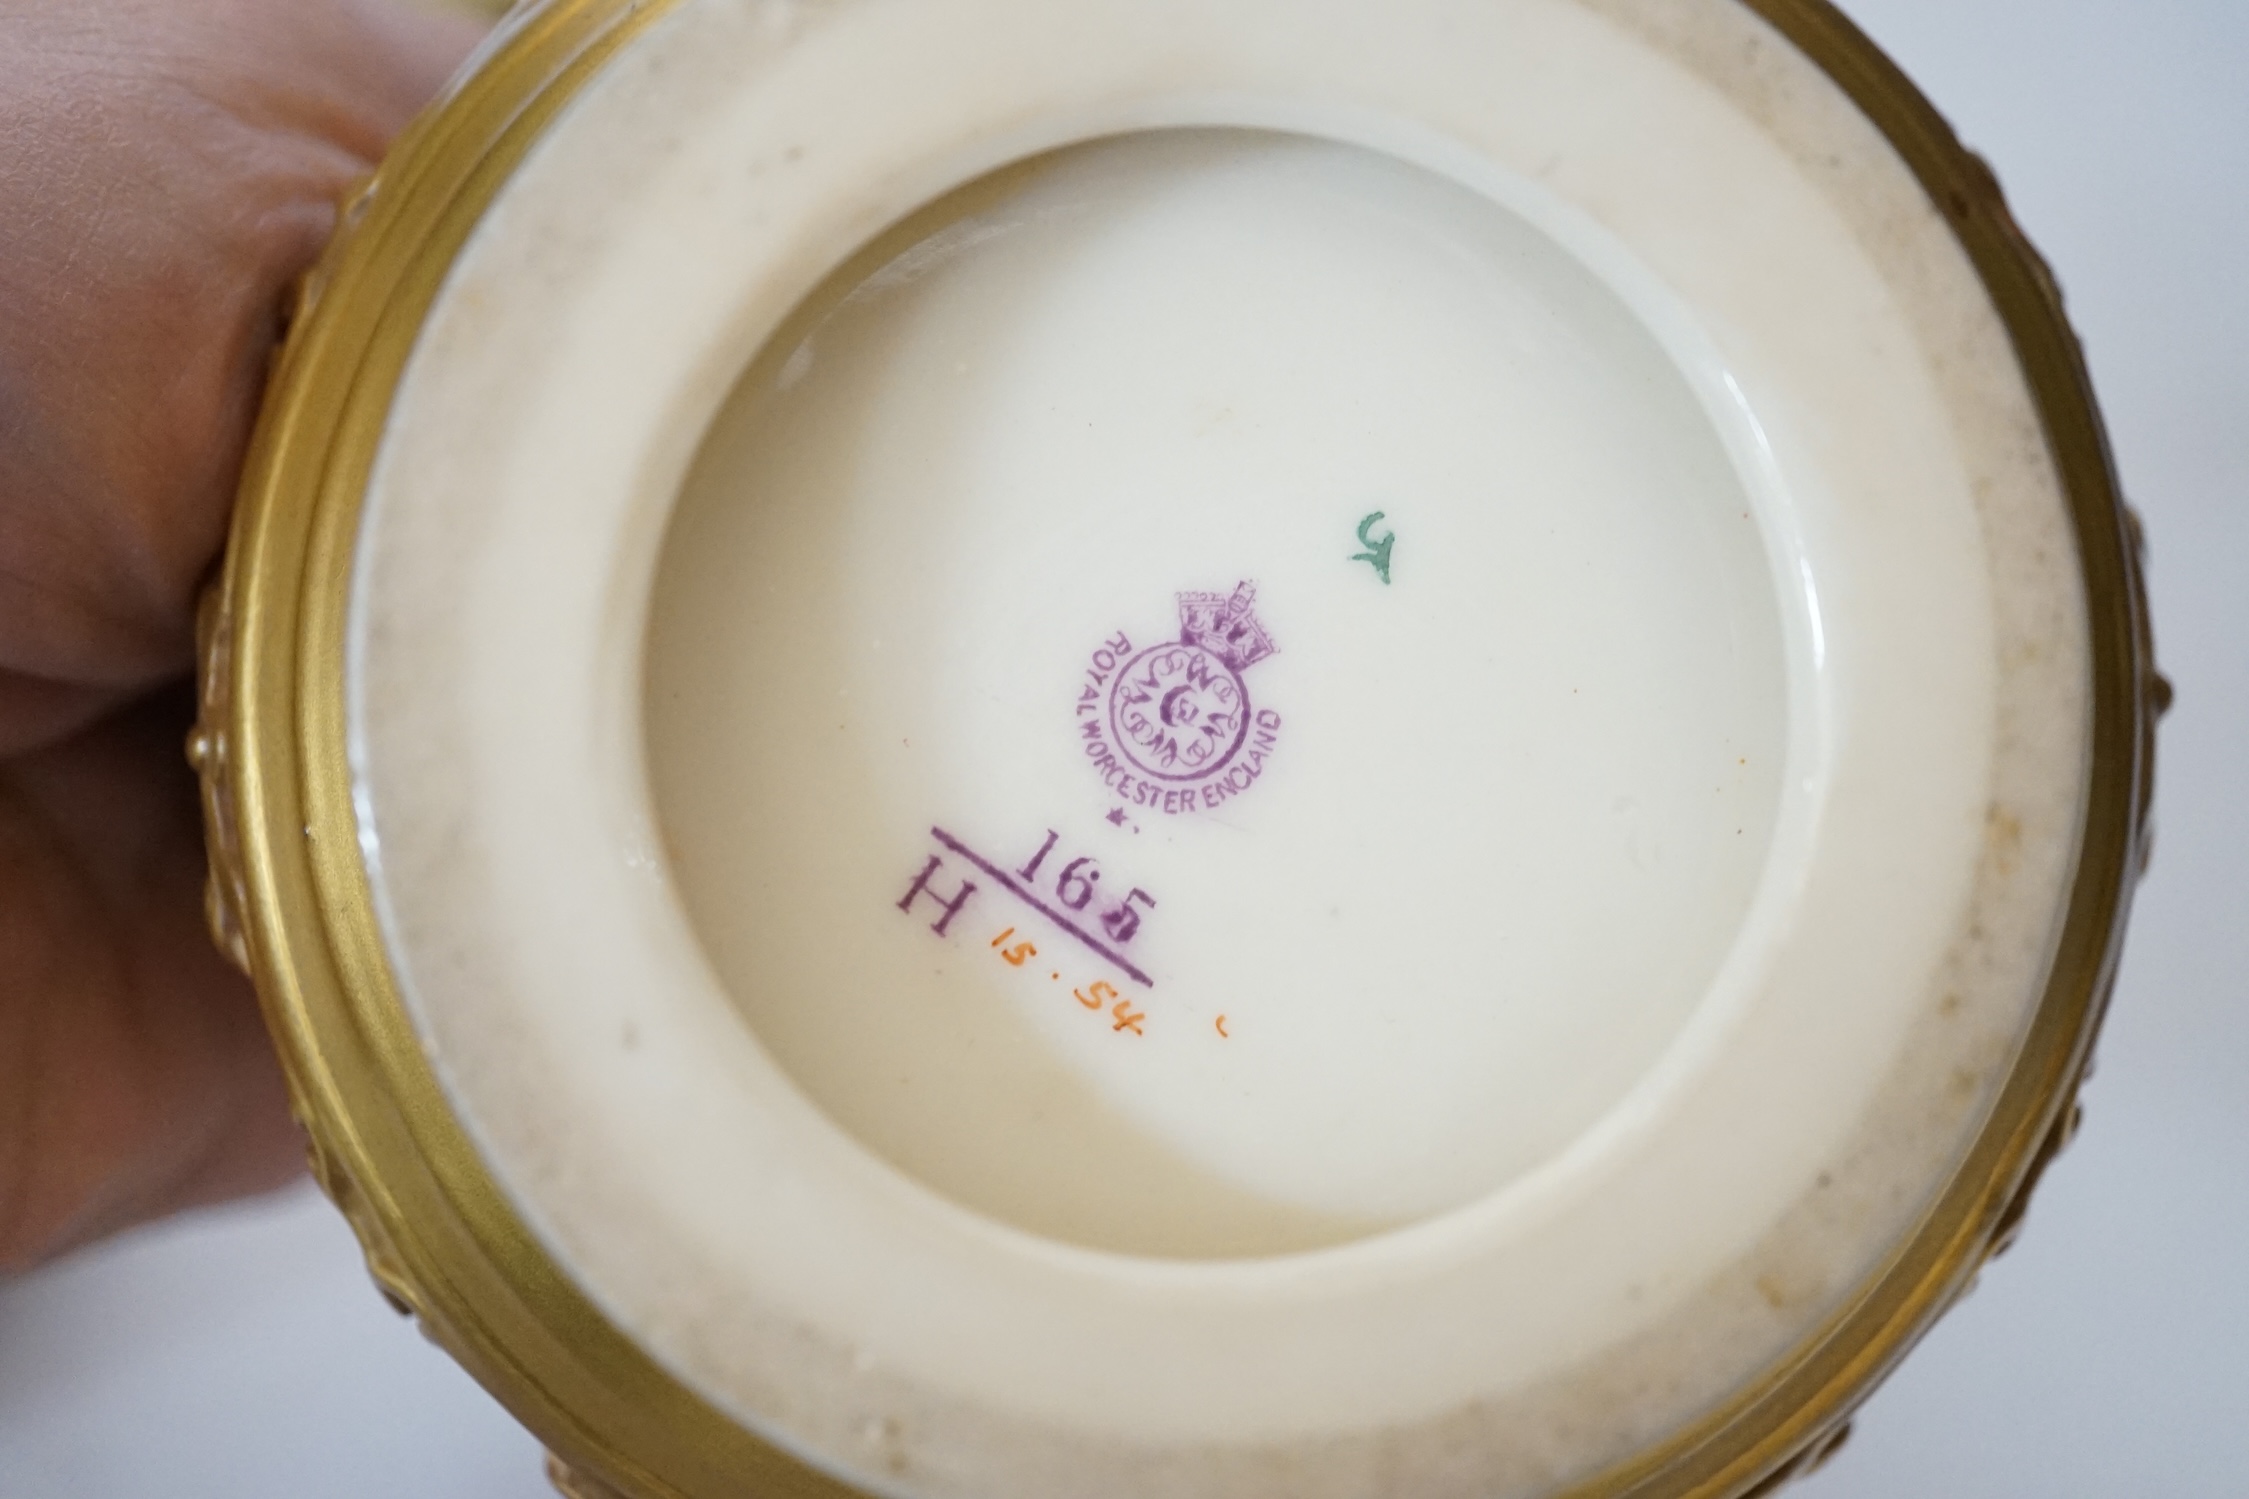 Three Royal Worcester blush ivory pots, one with an inner lid and pierced outer lid, tallest 14cm